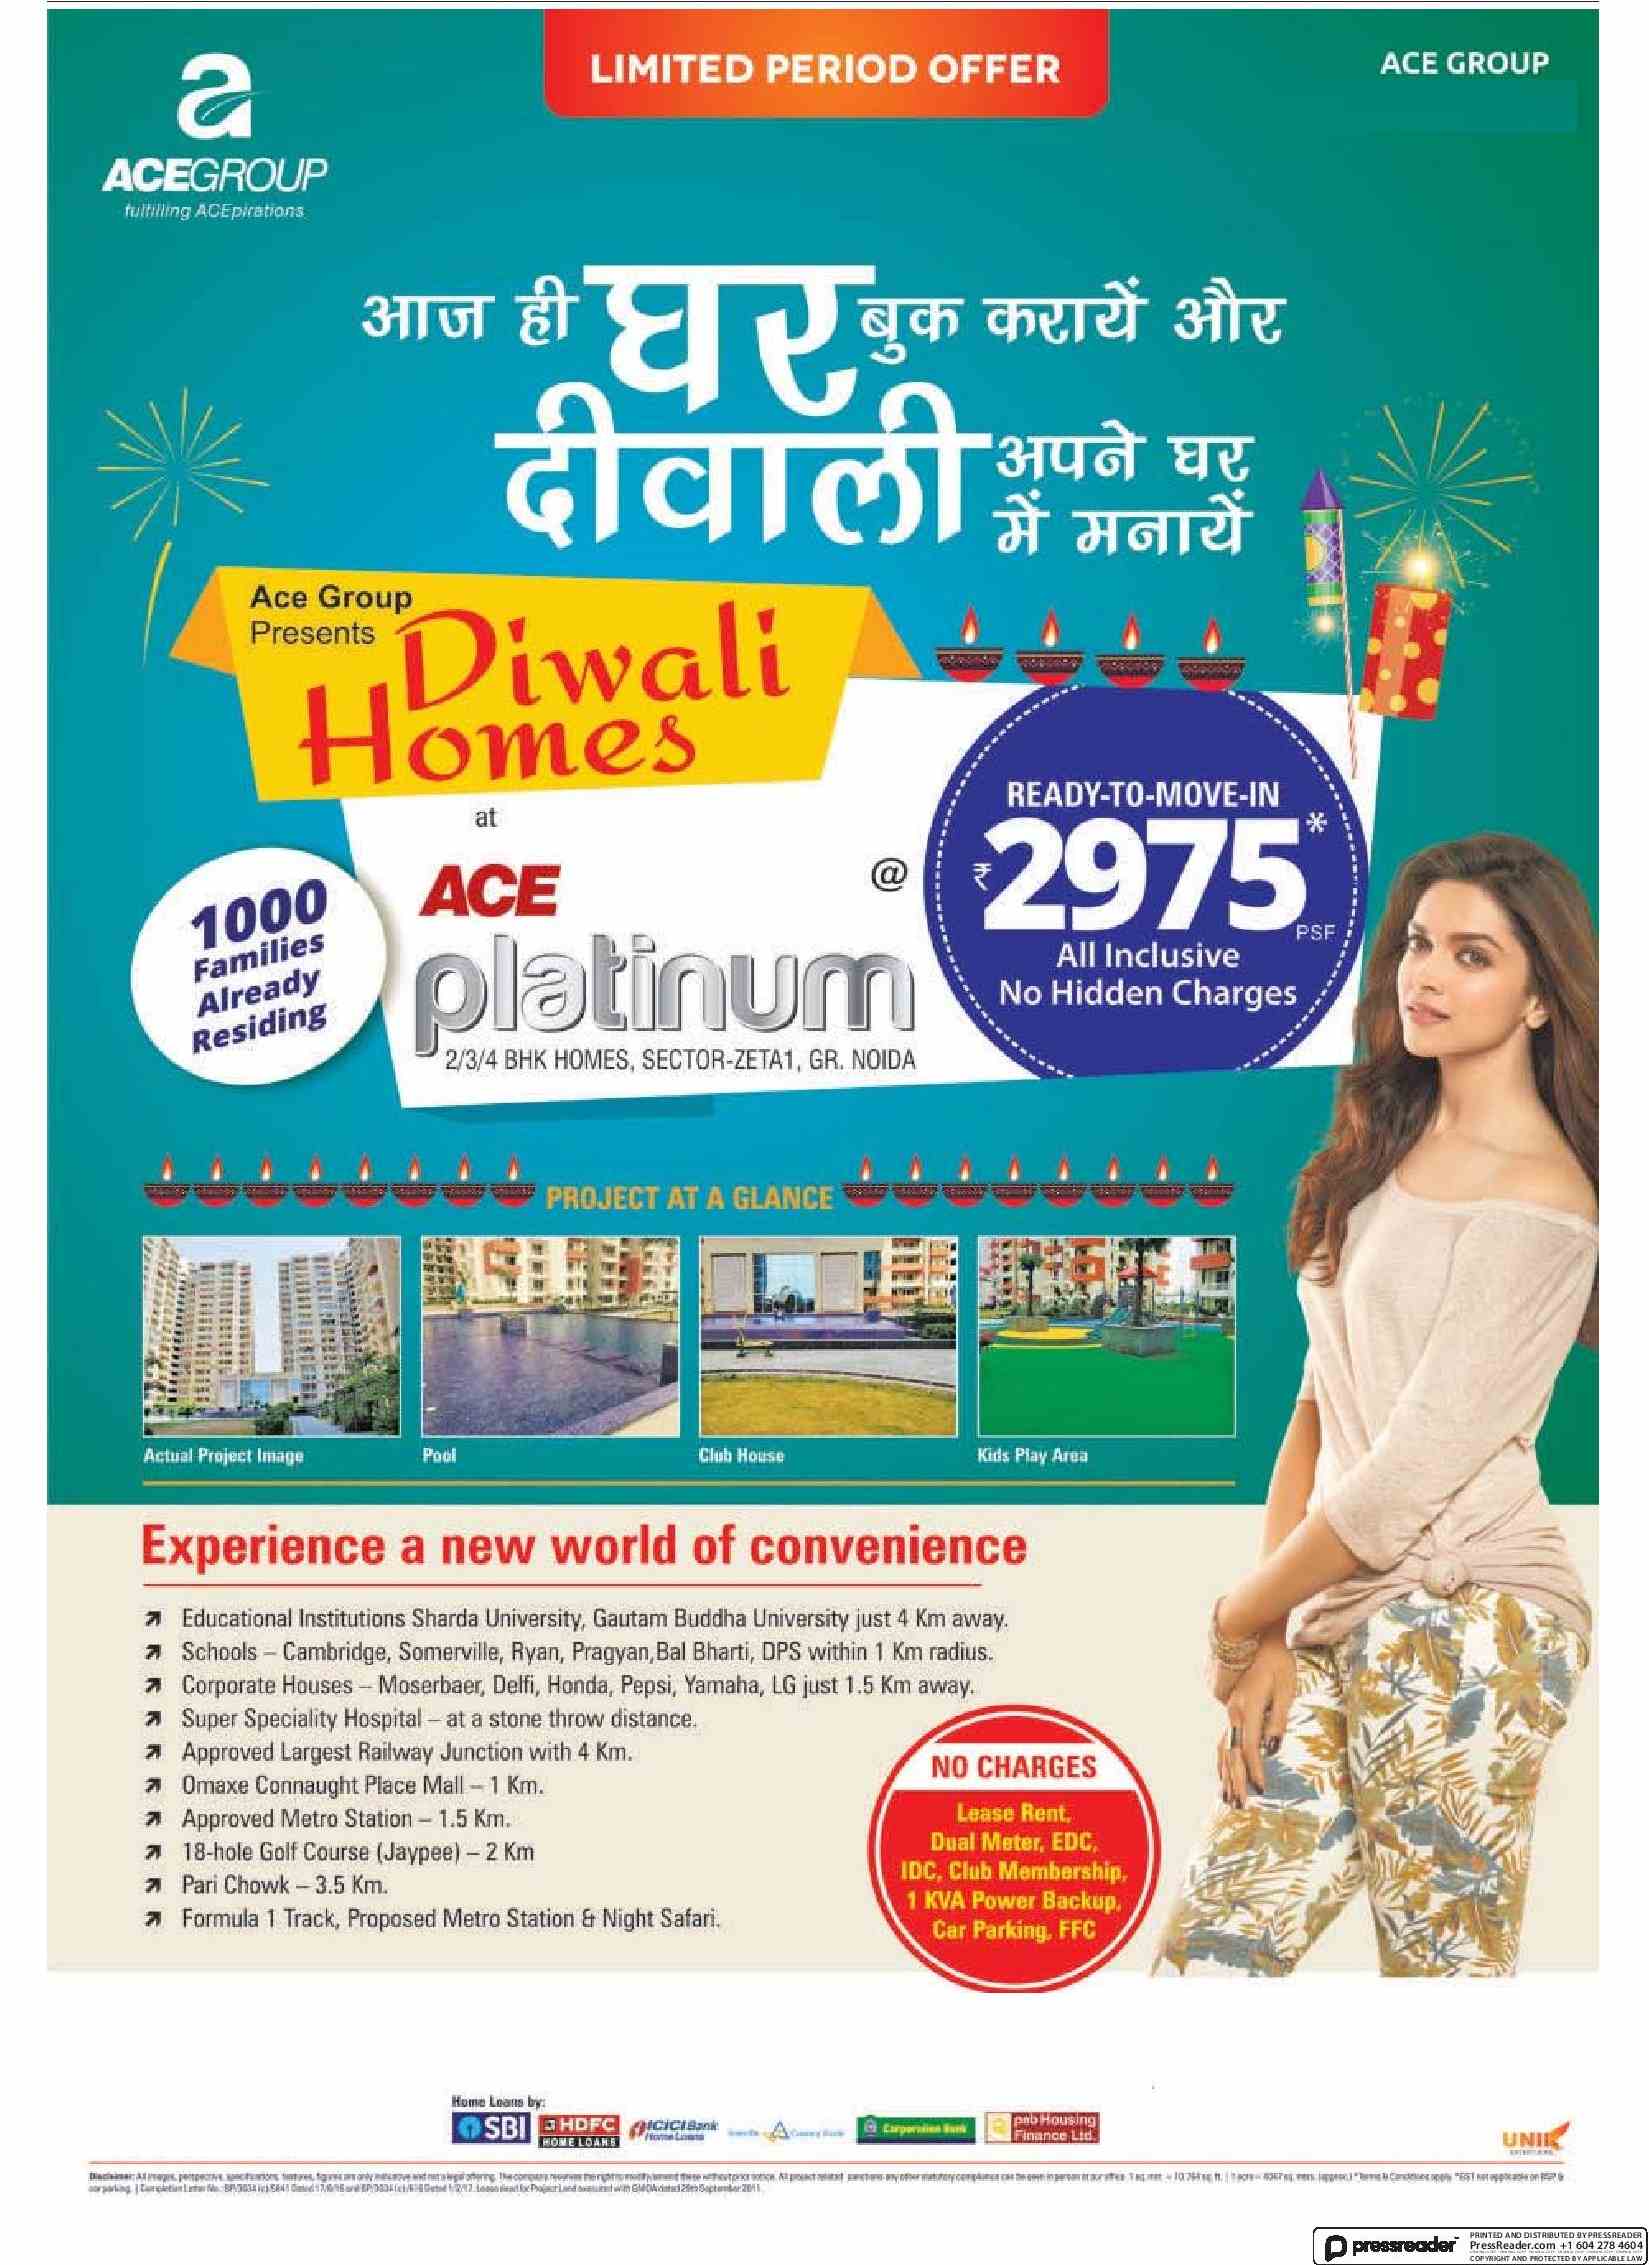 Book ready to move-in homes at Rs. 2975 per sq.ft. at Ace Platinum in Greater Noida